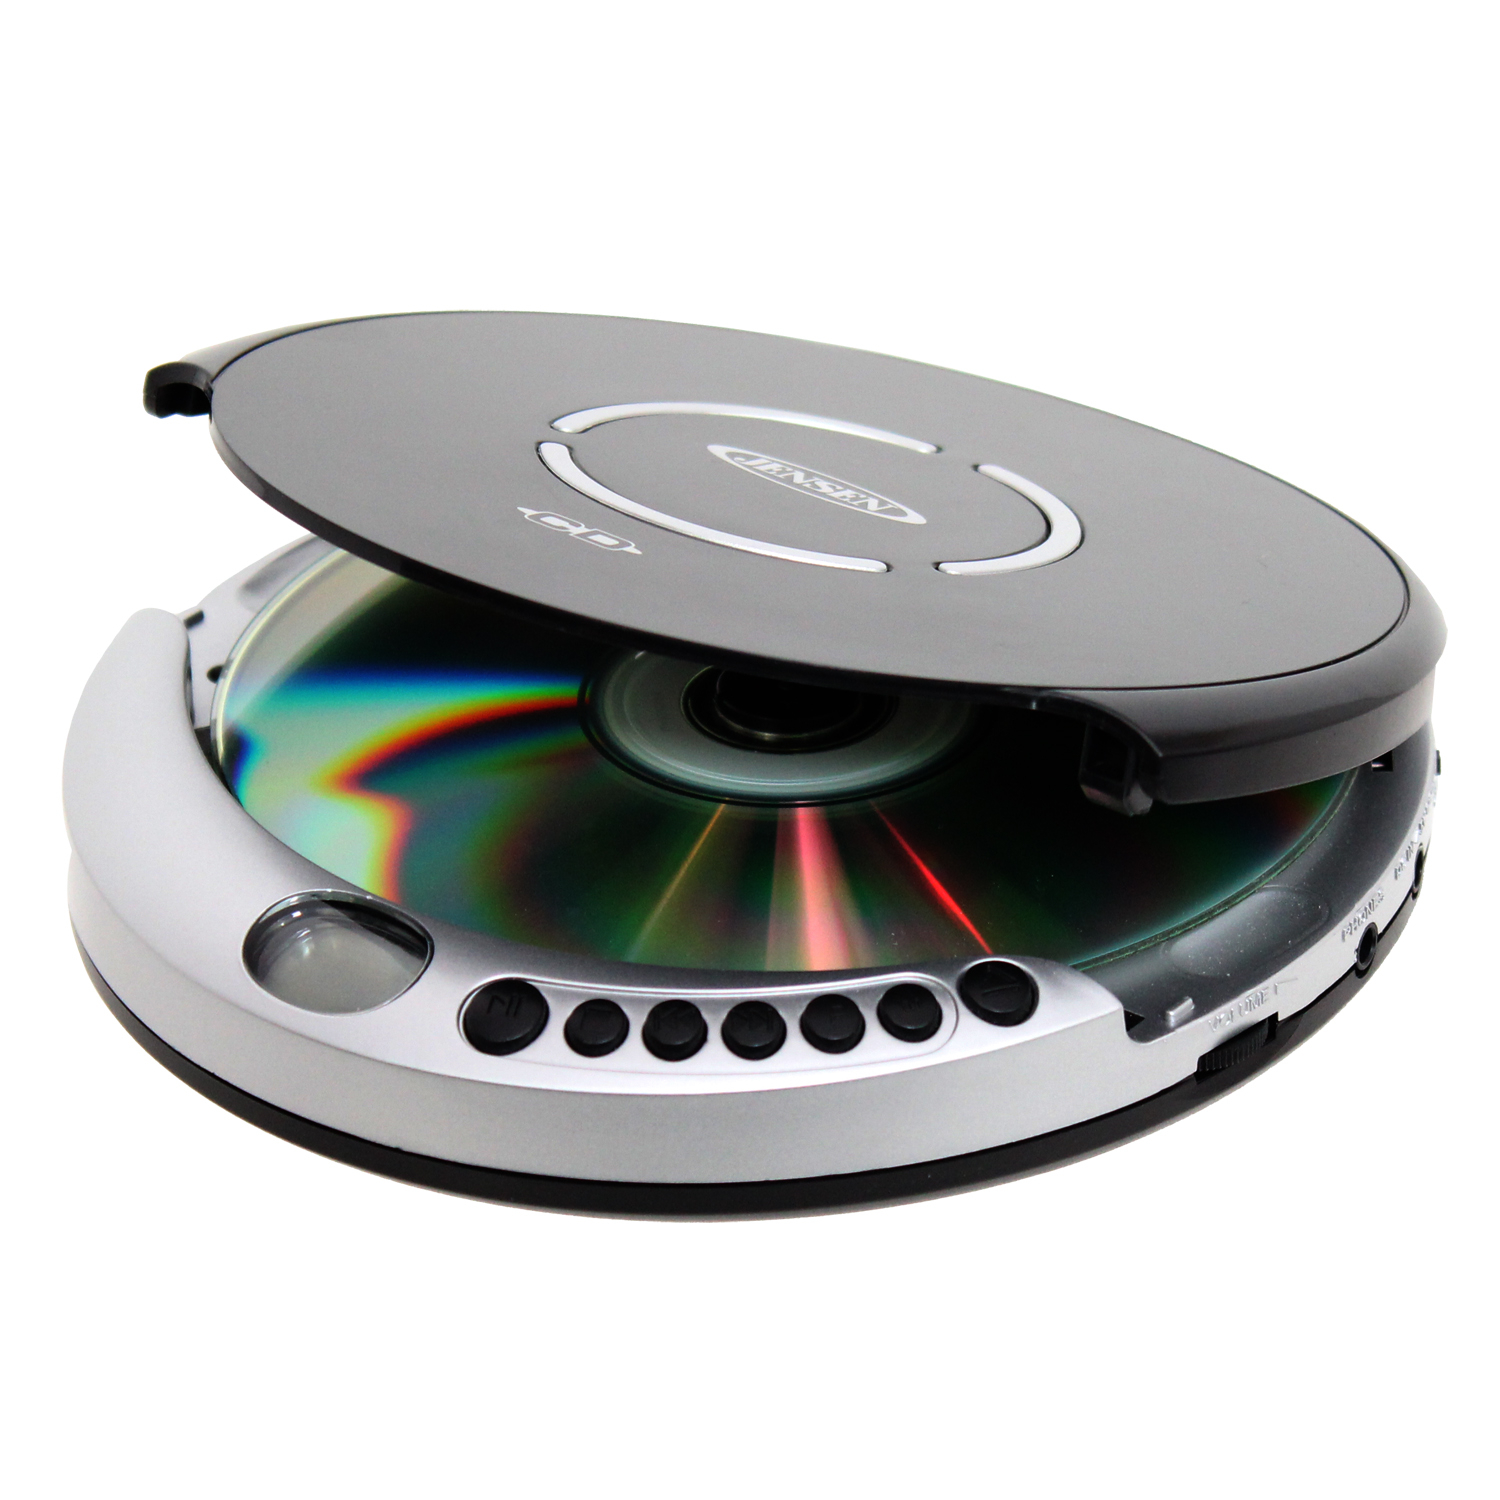 Jensen Portable CD Player With FM Receiver